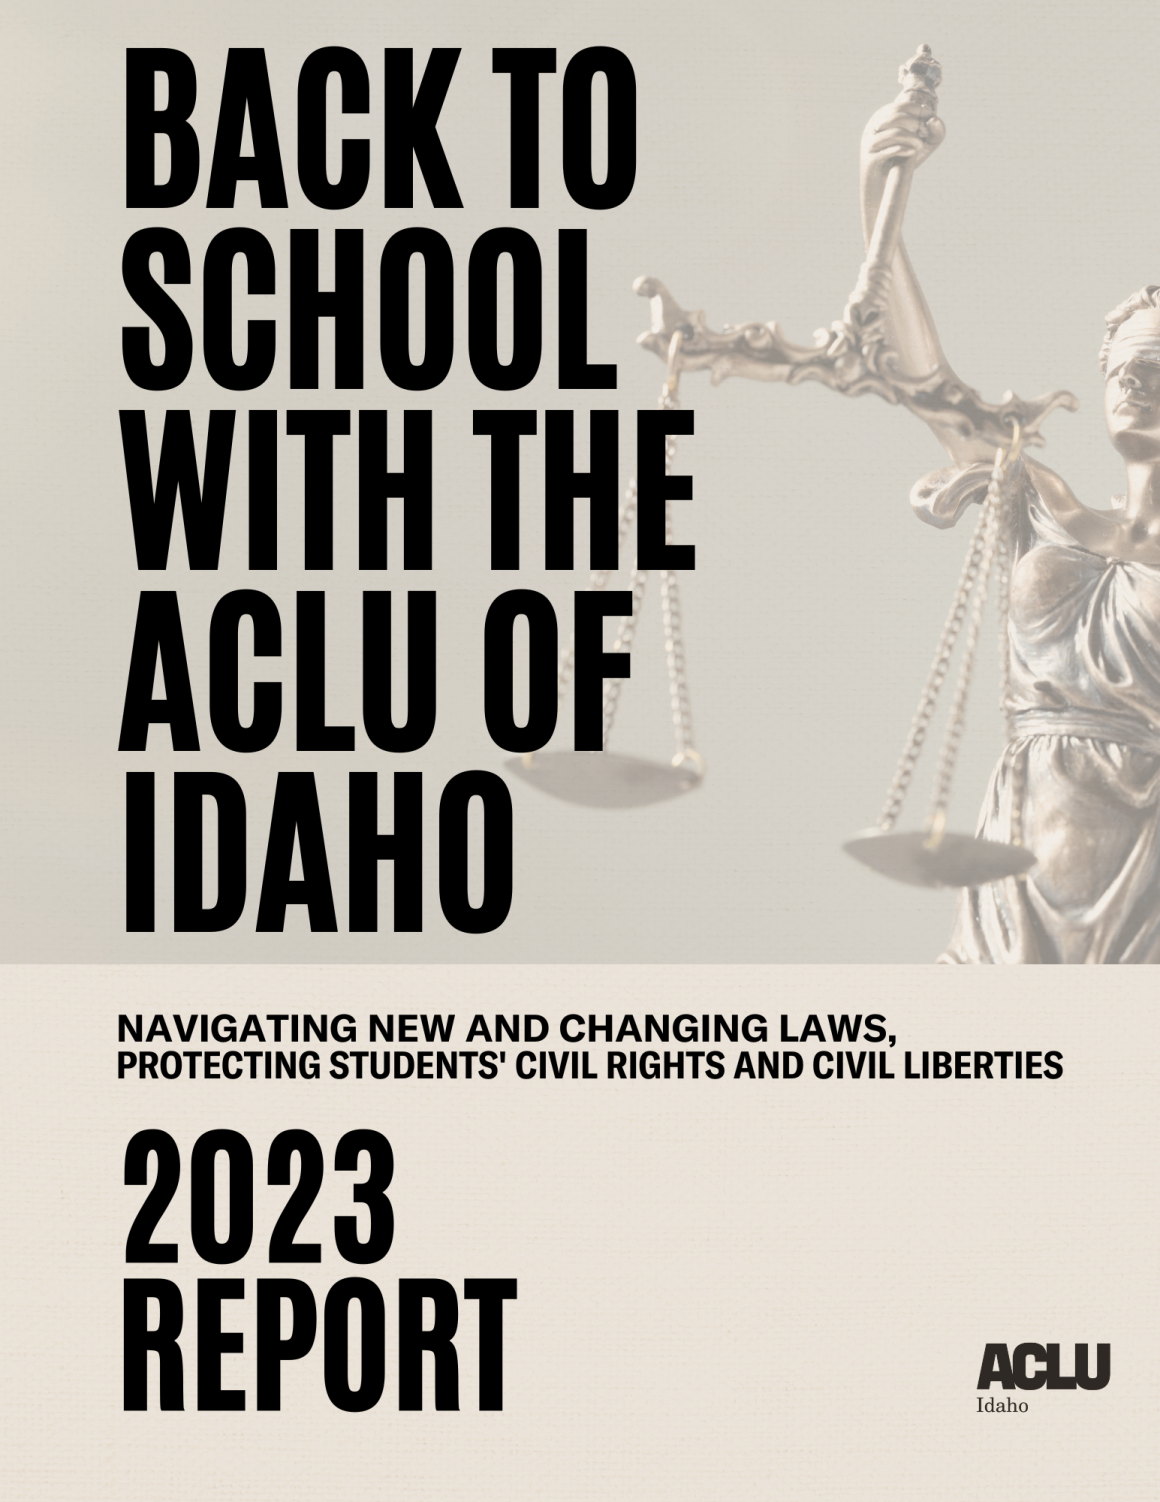 A beige rectangle holds the words "Back to School with the ACLU of Idaho" in black letters. In the background is a picture of a blindfolded woman holding scales. Below  is the ACLU Idaho logo in black letters. 